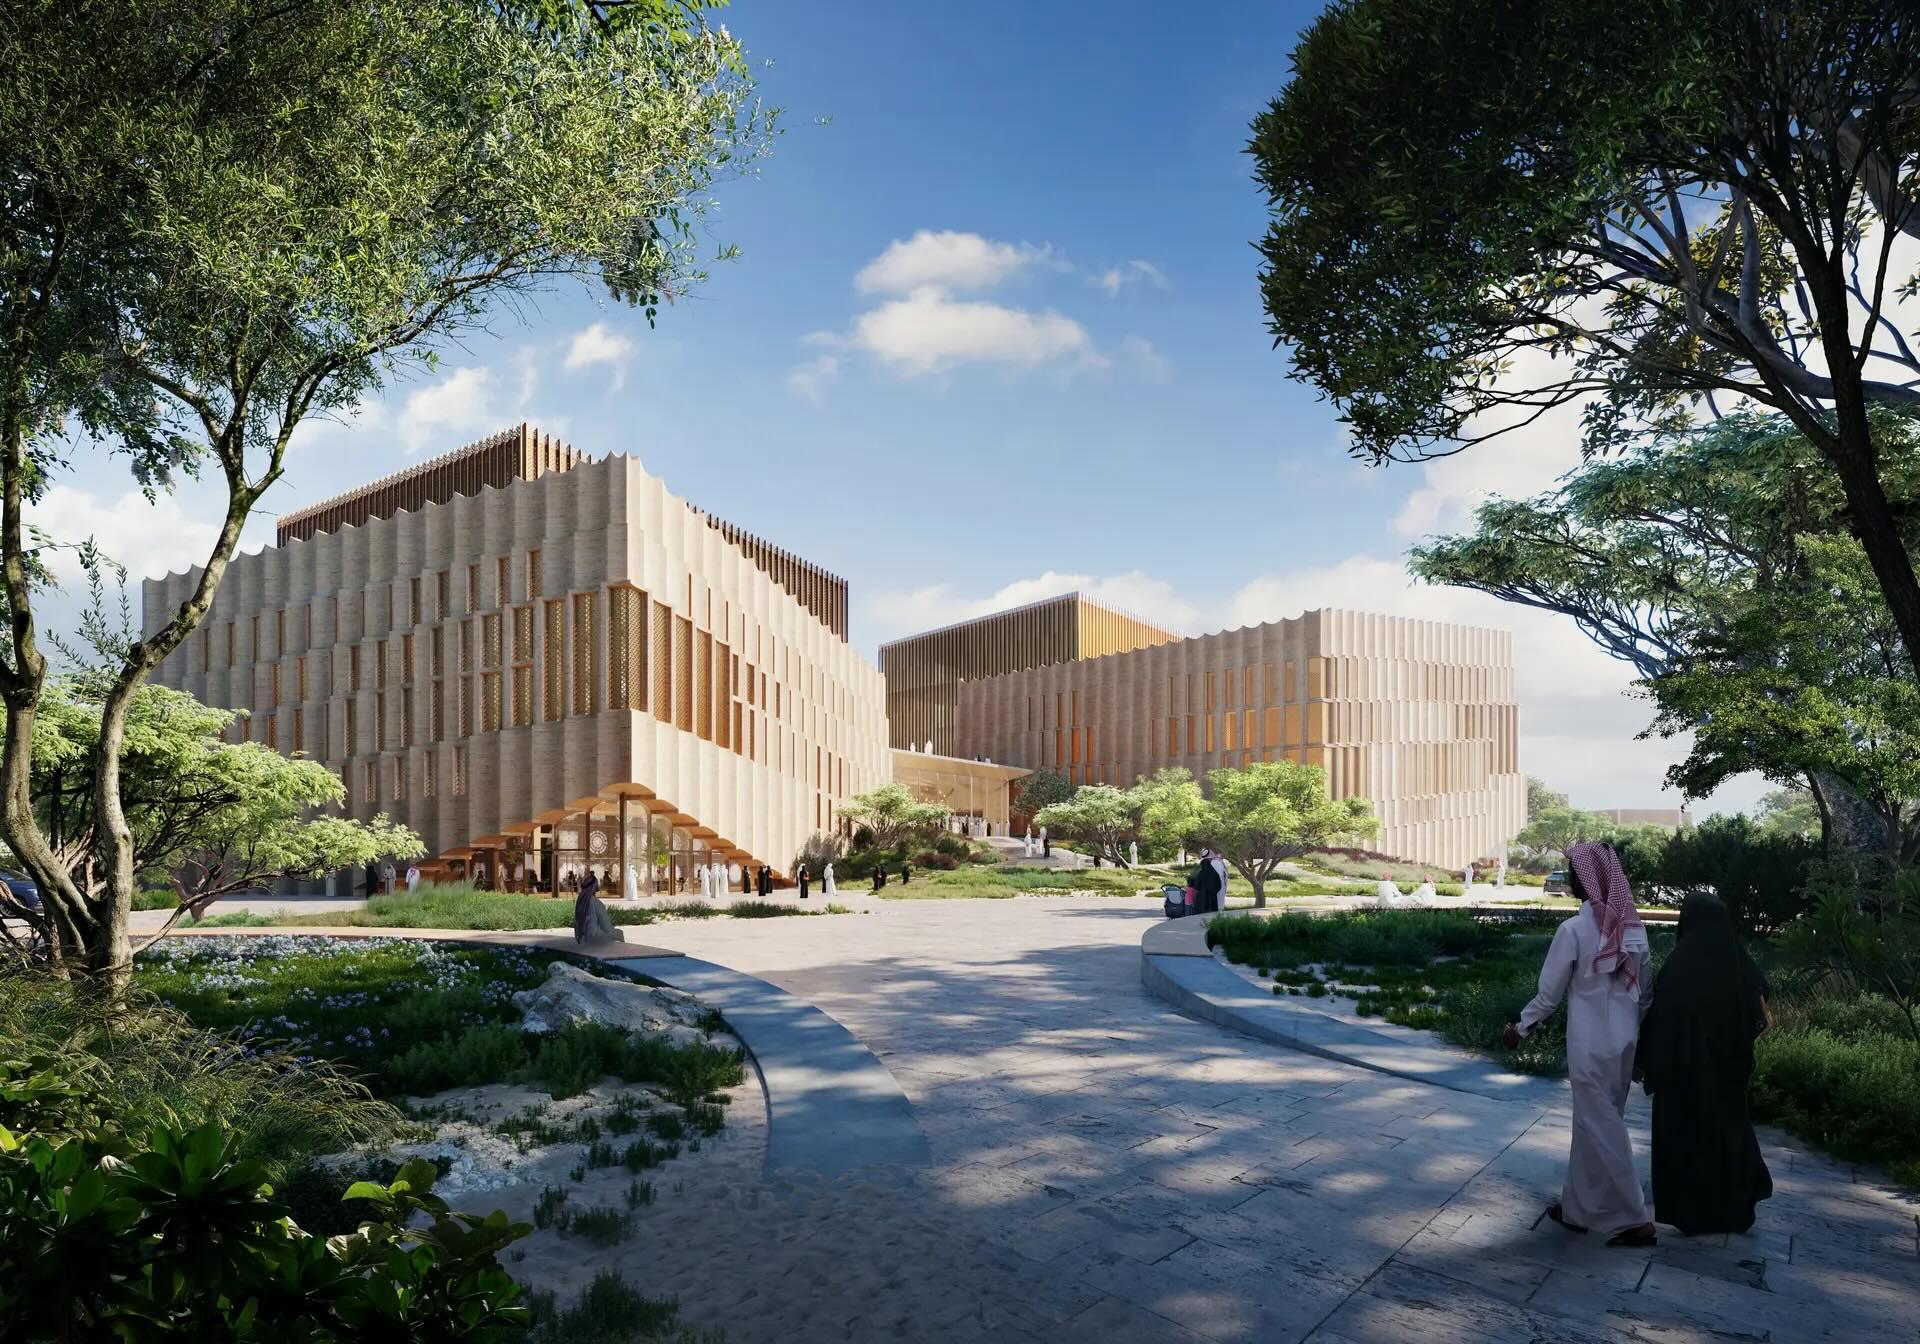 The Jeddah Opera House design has just been unveiled